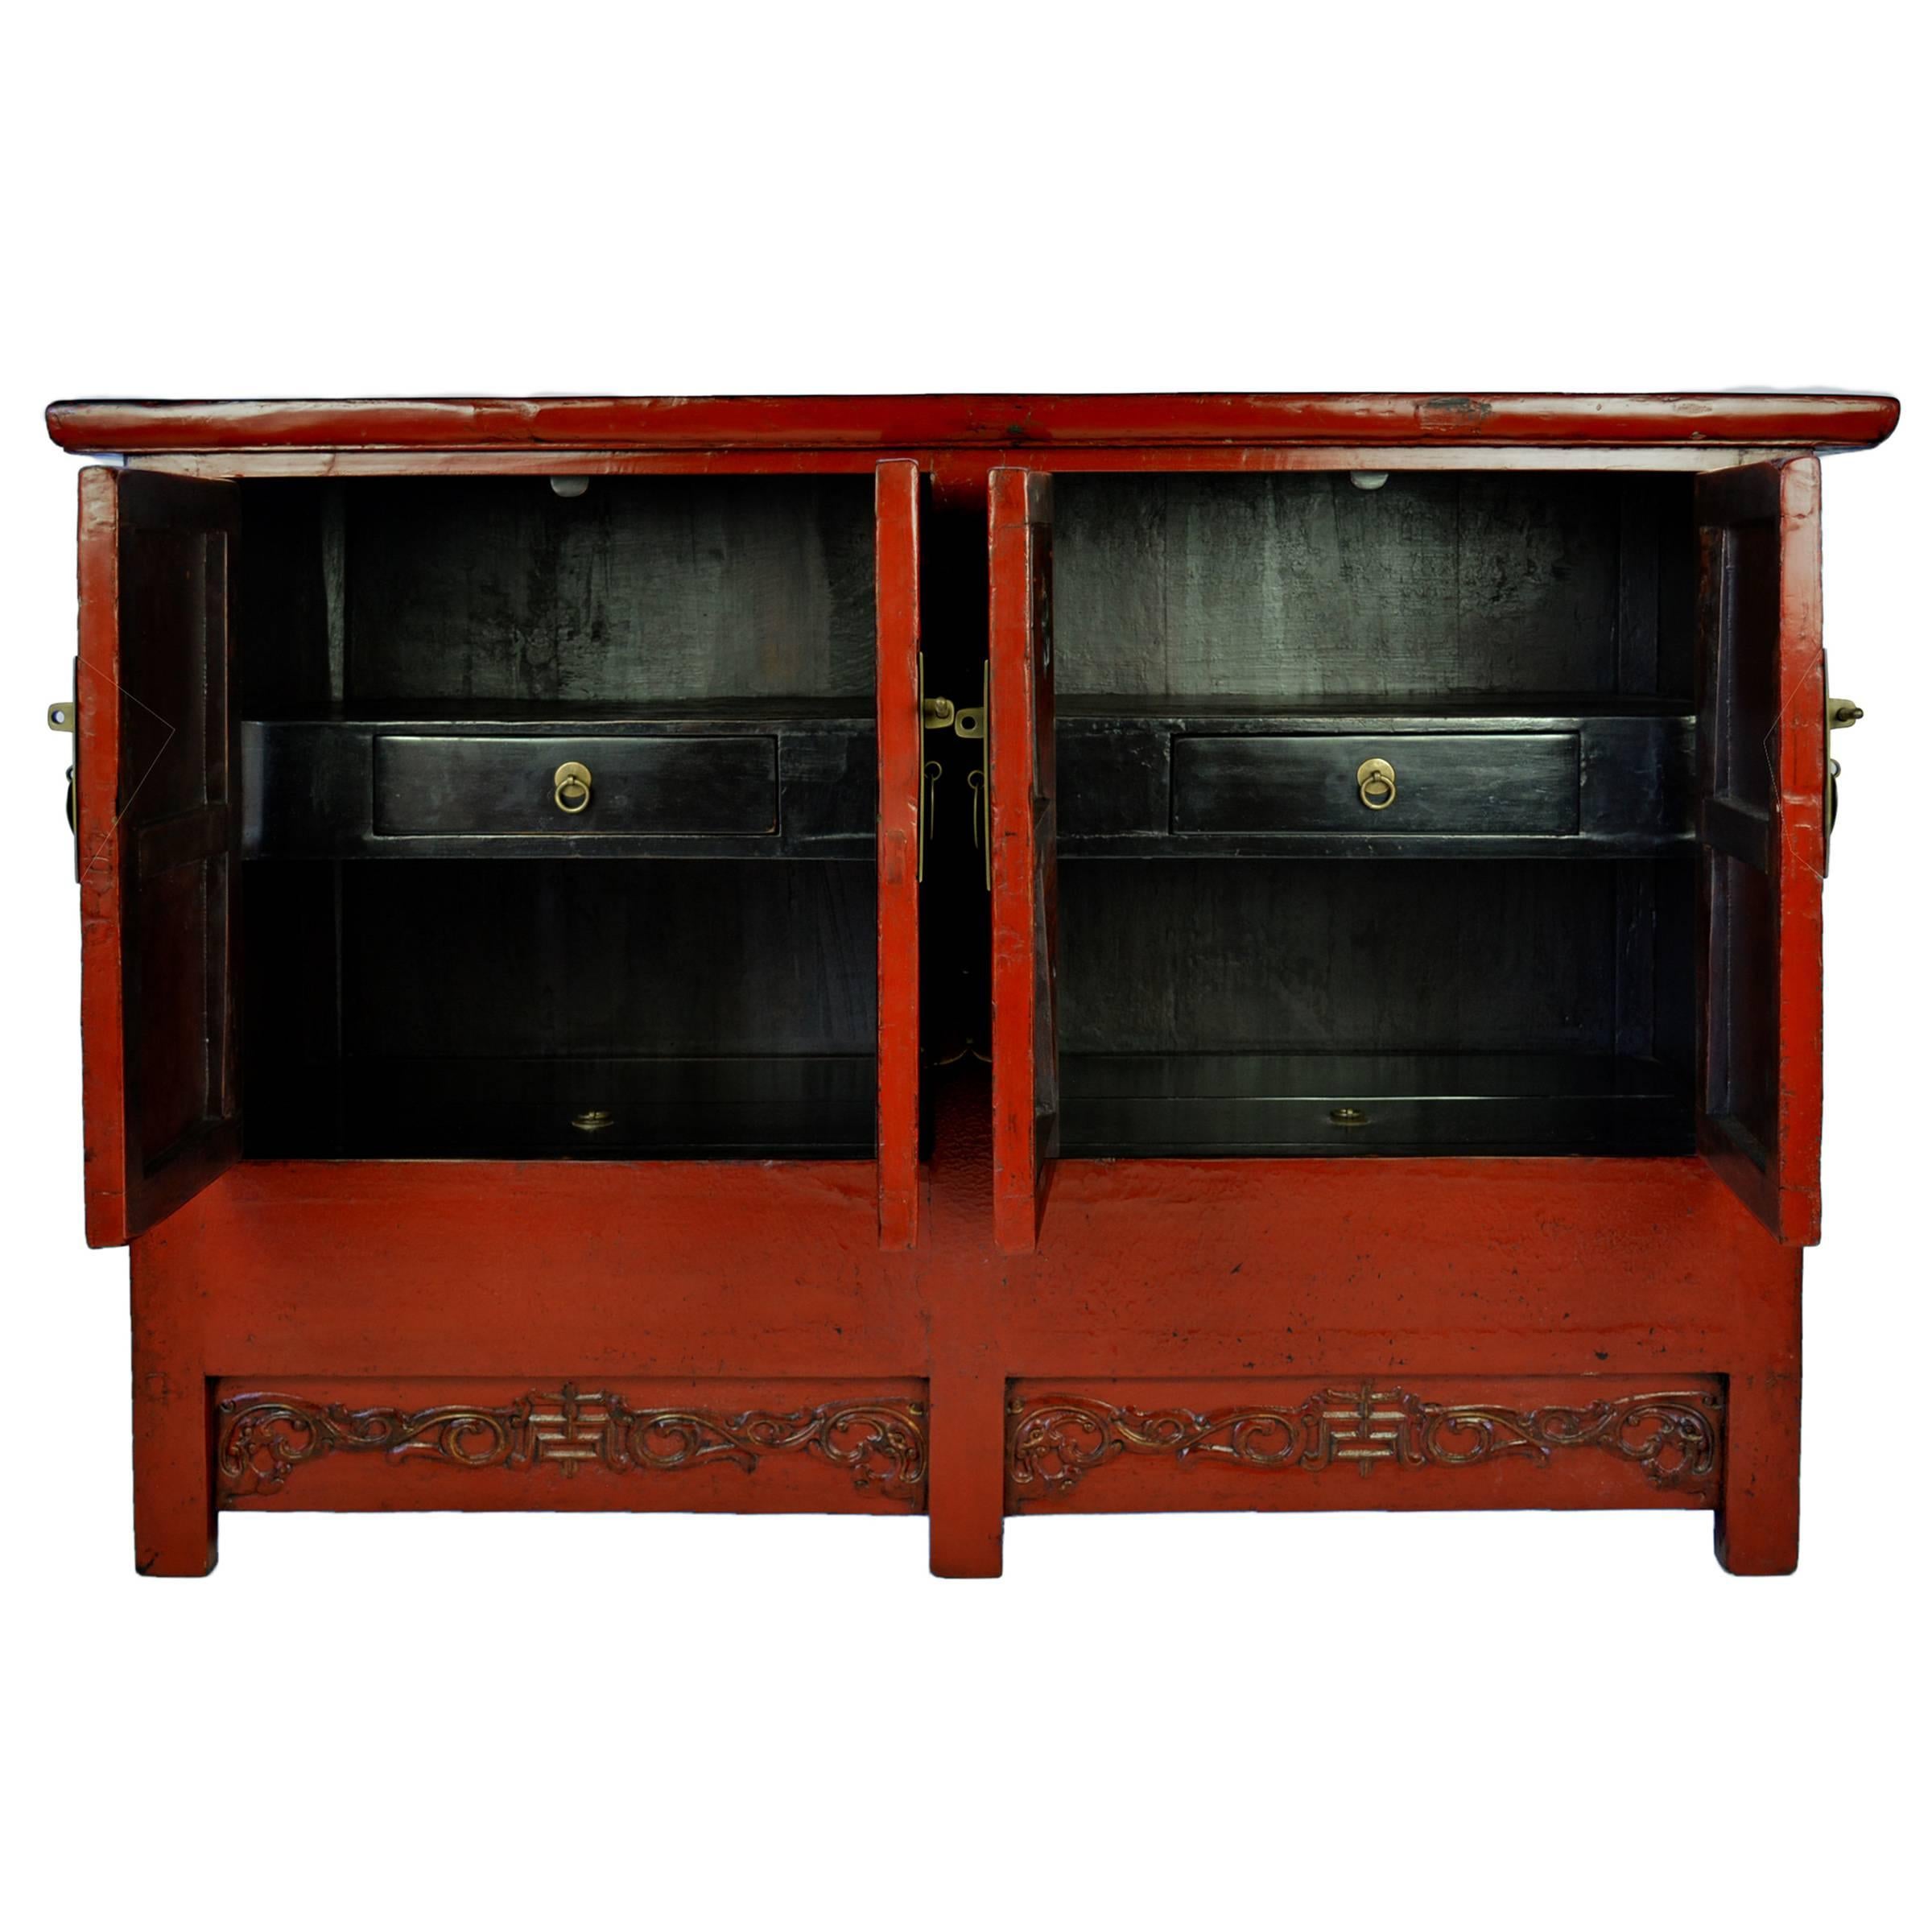 Since traditional 19th century Chinese homes were built without closets, this red lacquer chest would have been used for general storage. The centre of each apron is carved with the symbol for longevity amidst trailing vines. The red lacquer finish